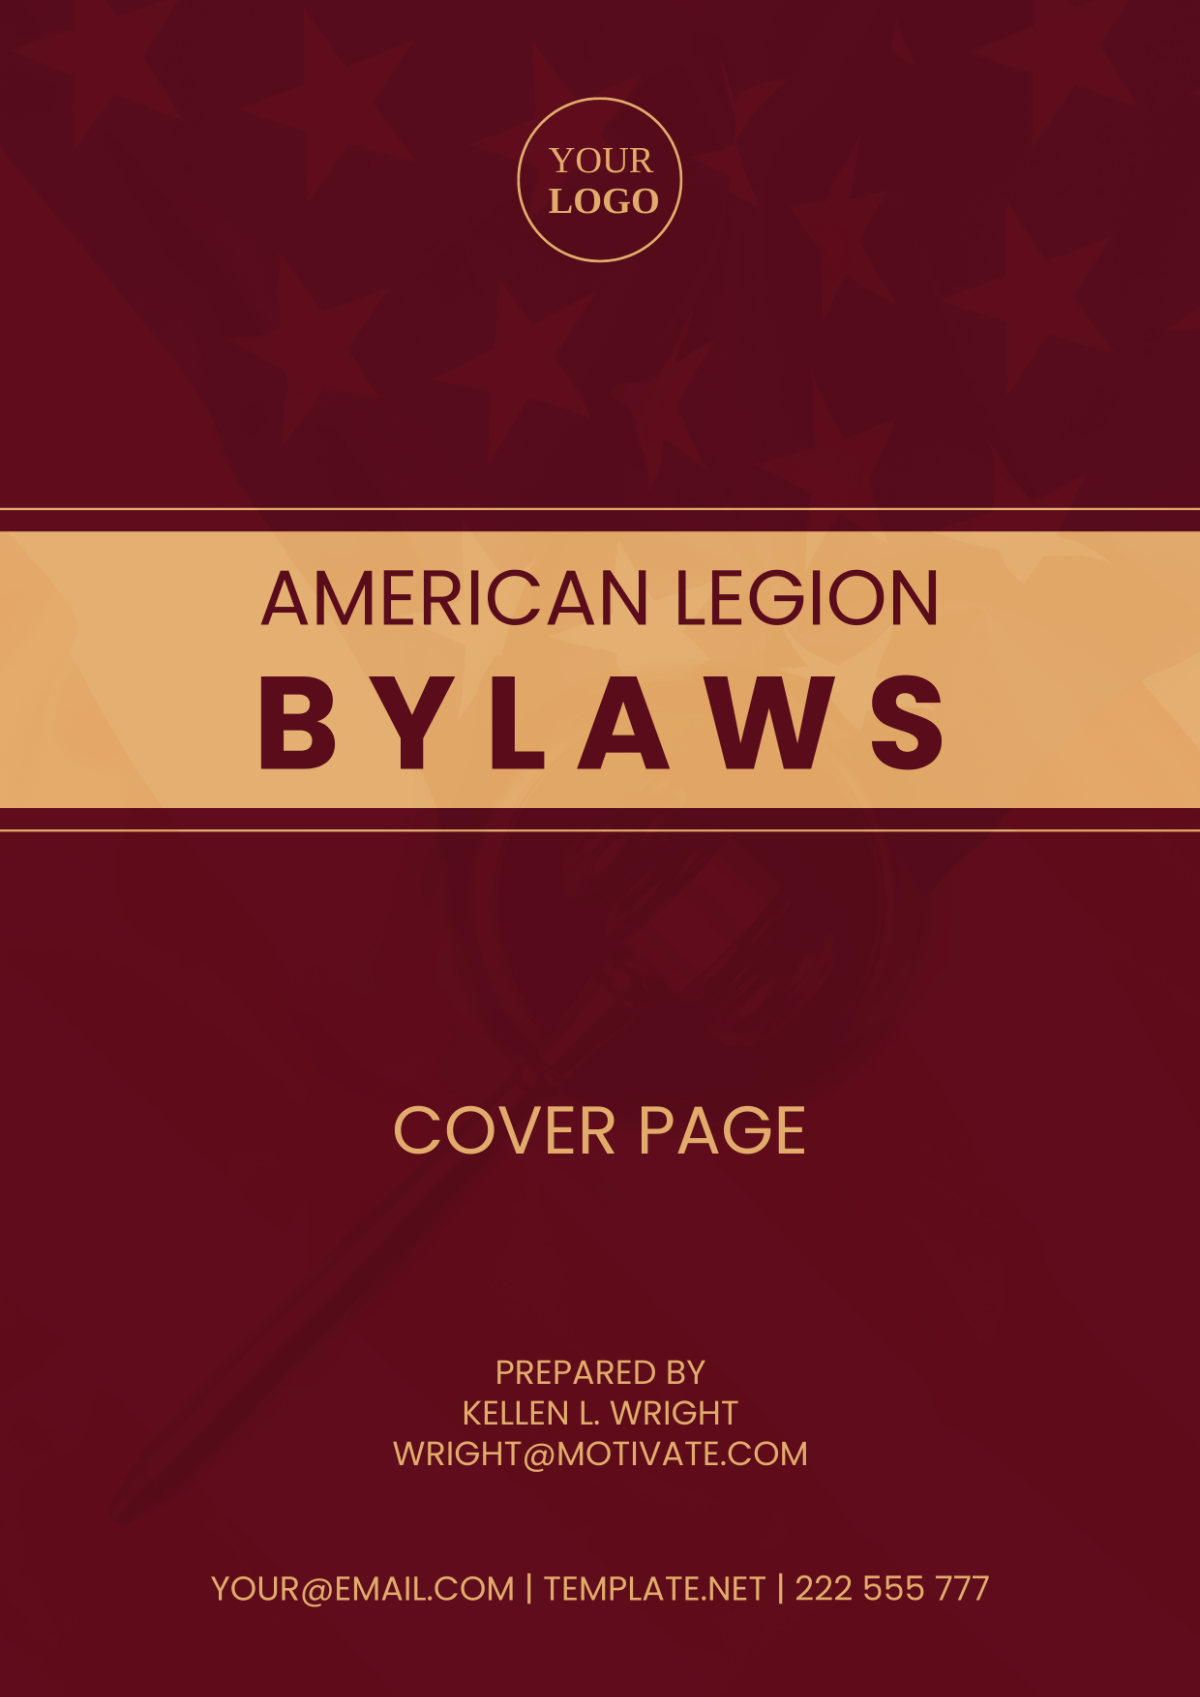 American Legion Bylaws Cover Page Template